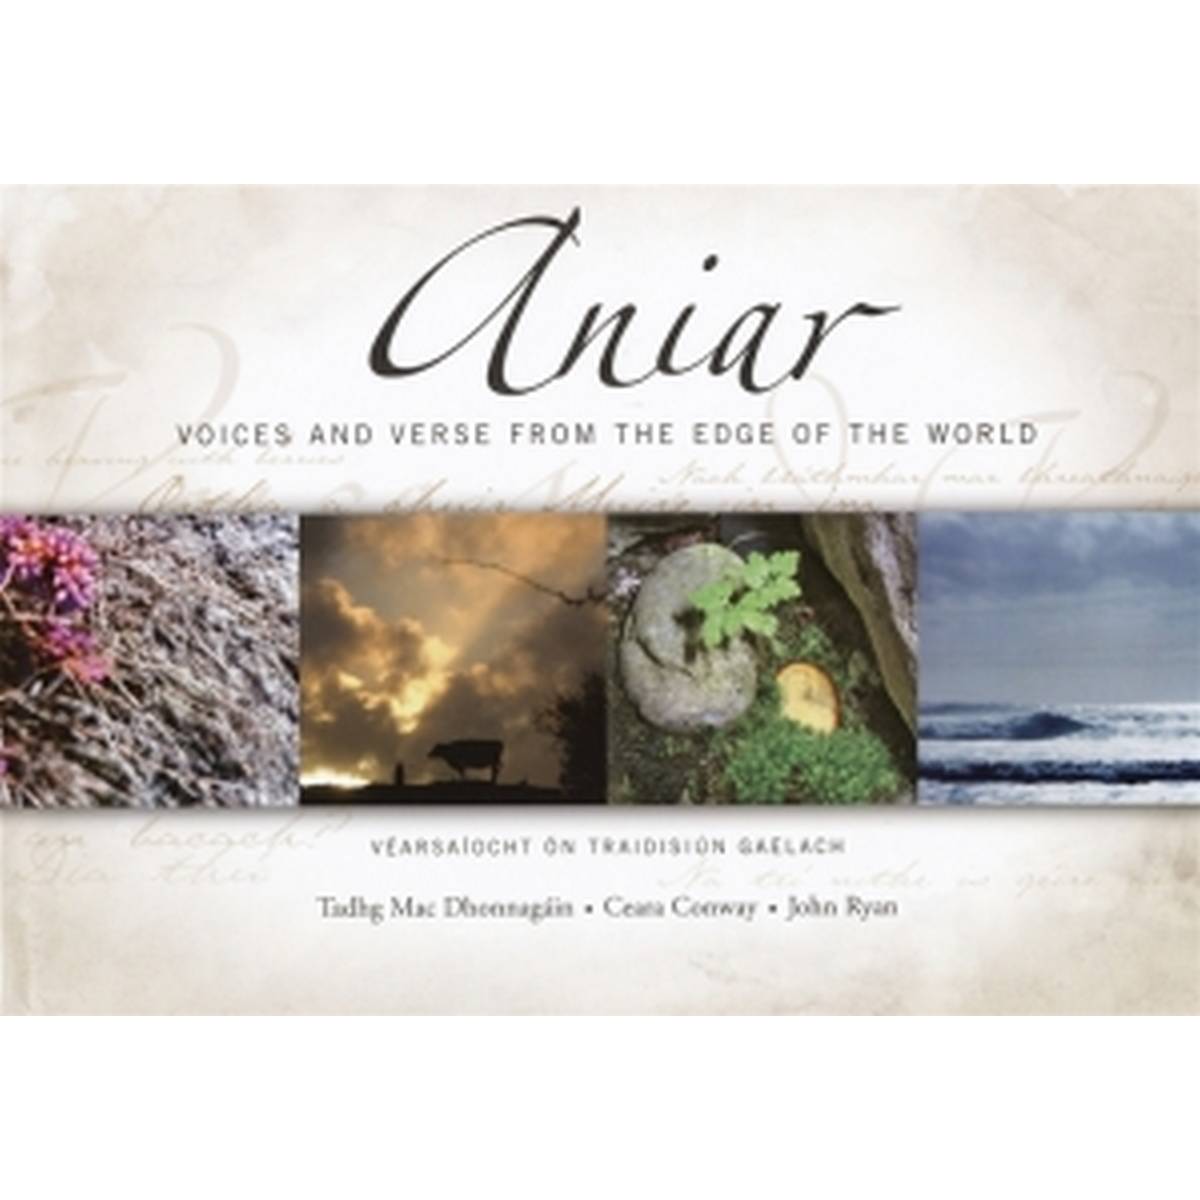 Aniar - Voices and Verse from the Edge of the World: Vearsaiocht on Traidisiun Gaelach